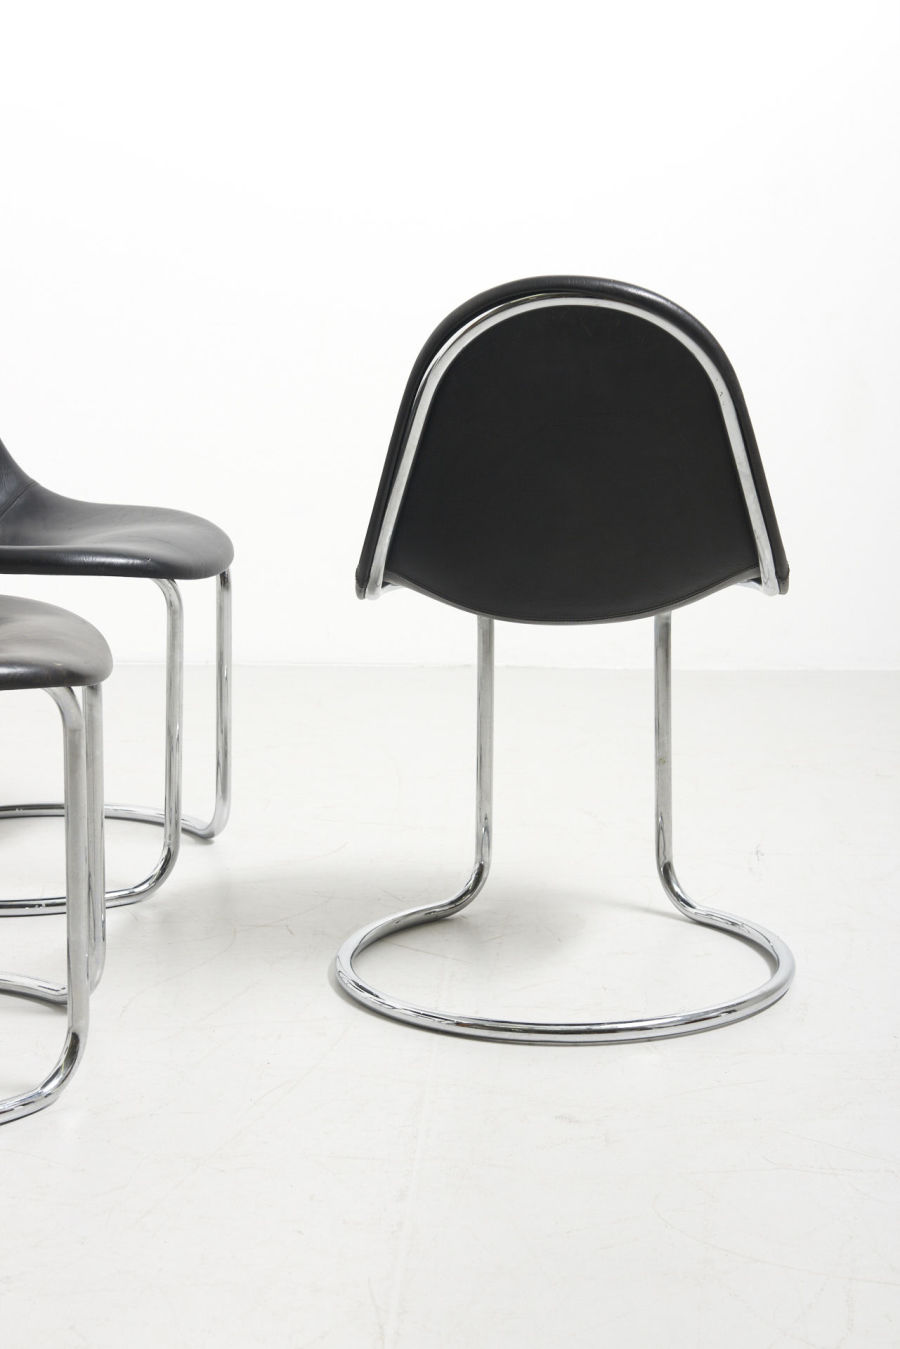 modestfurniture-vintage-2702-6-italian-dining-chairs-chrome-giotto-stoppino05